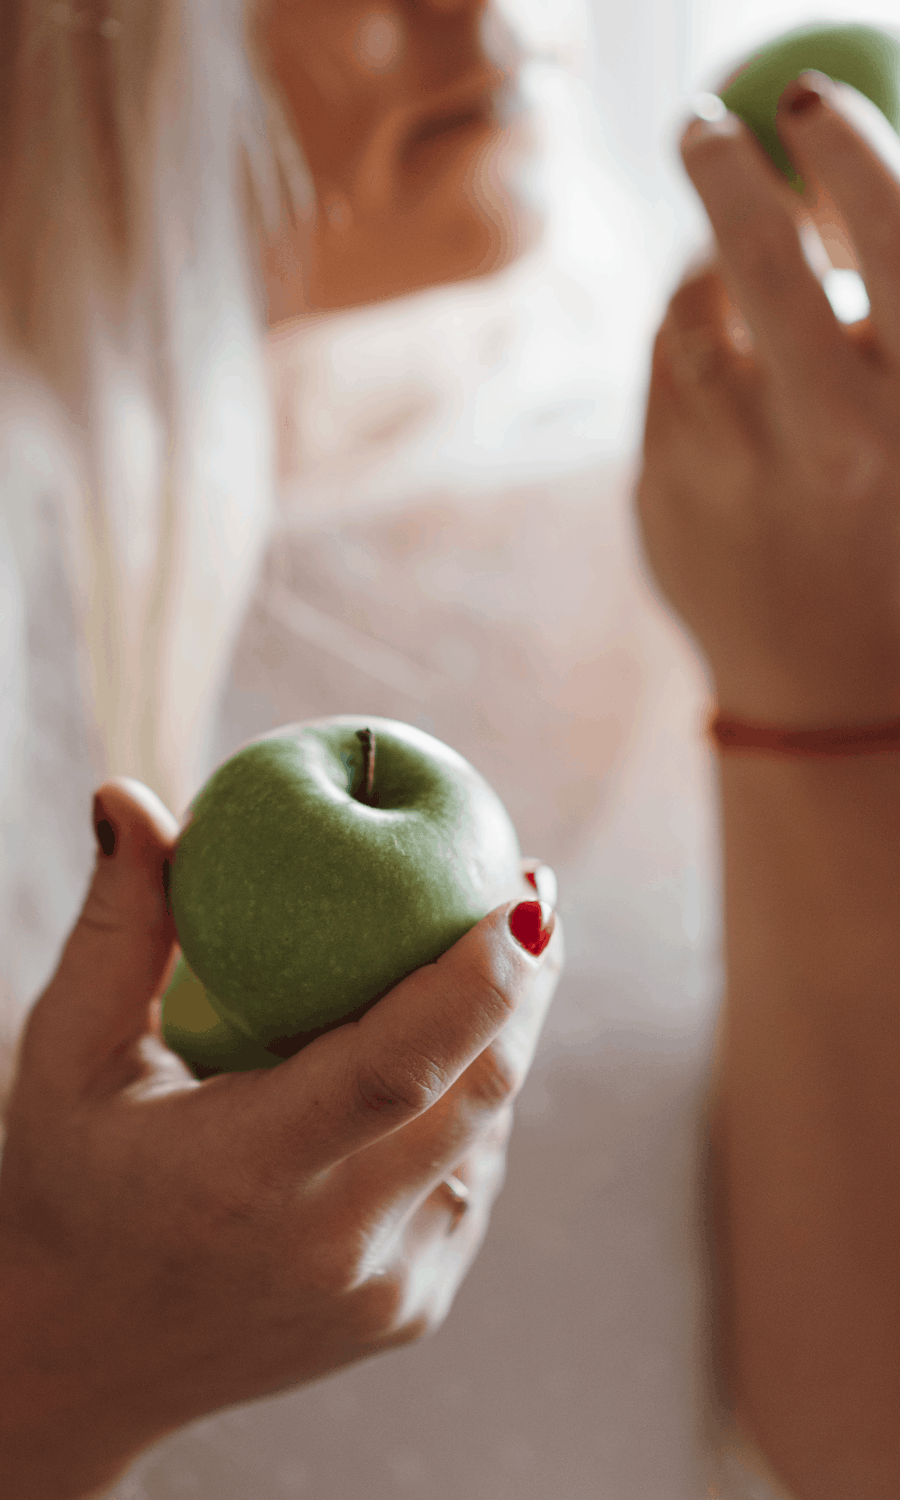 Woman contemplating eating an apple